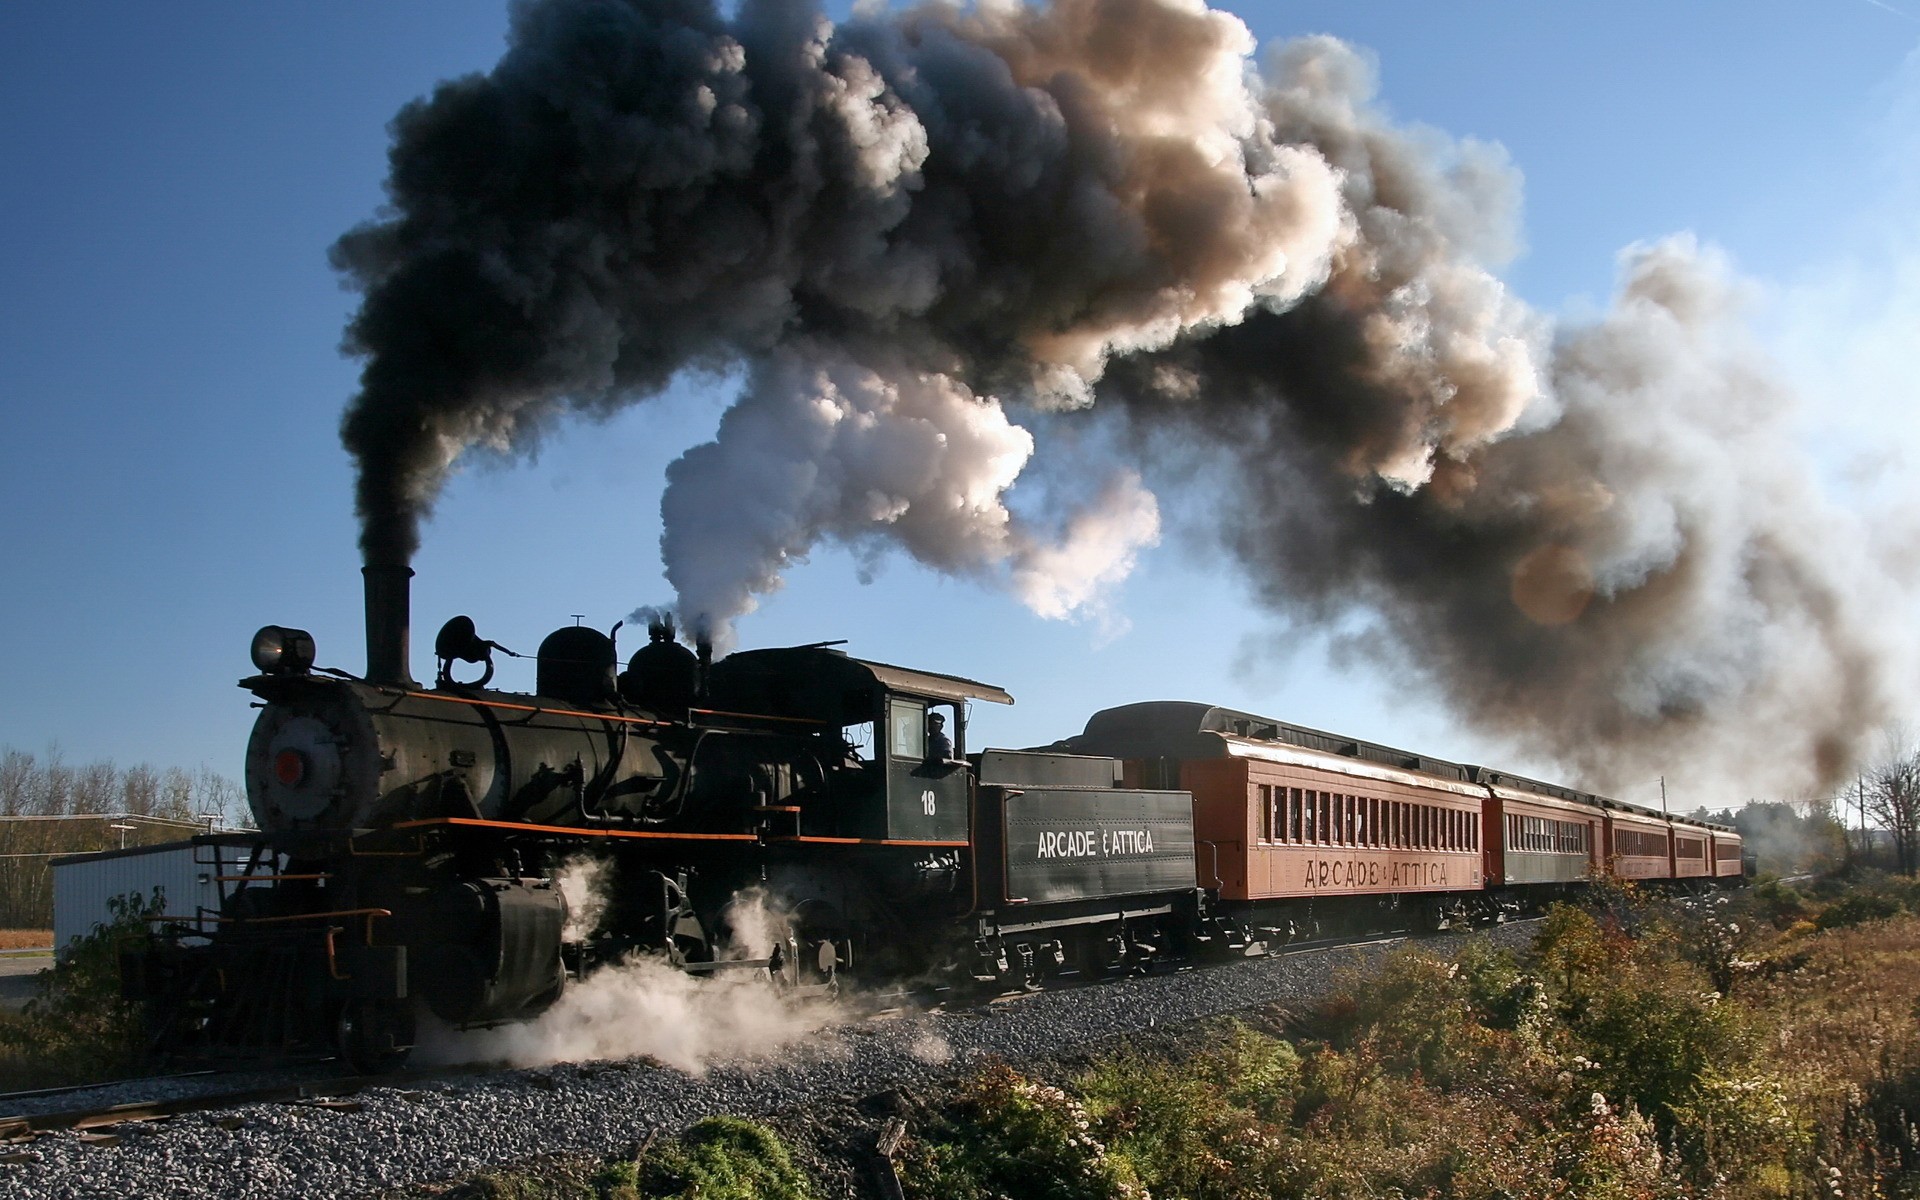 Steam Train HD Wallpaper Background Of Your Choice